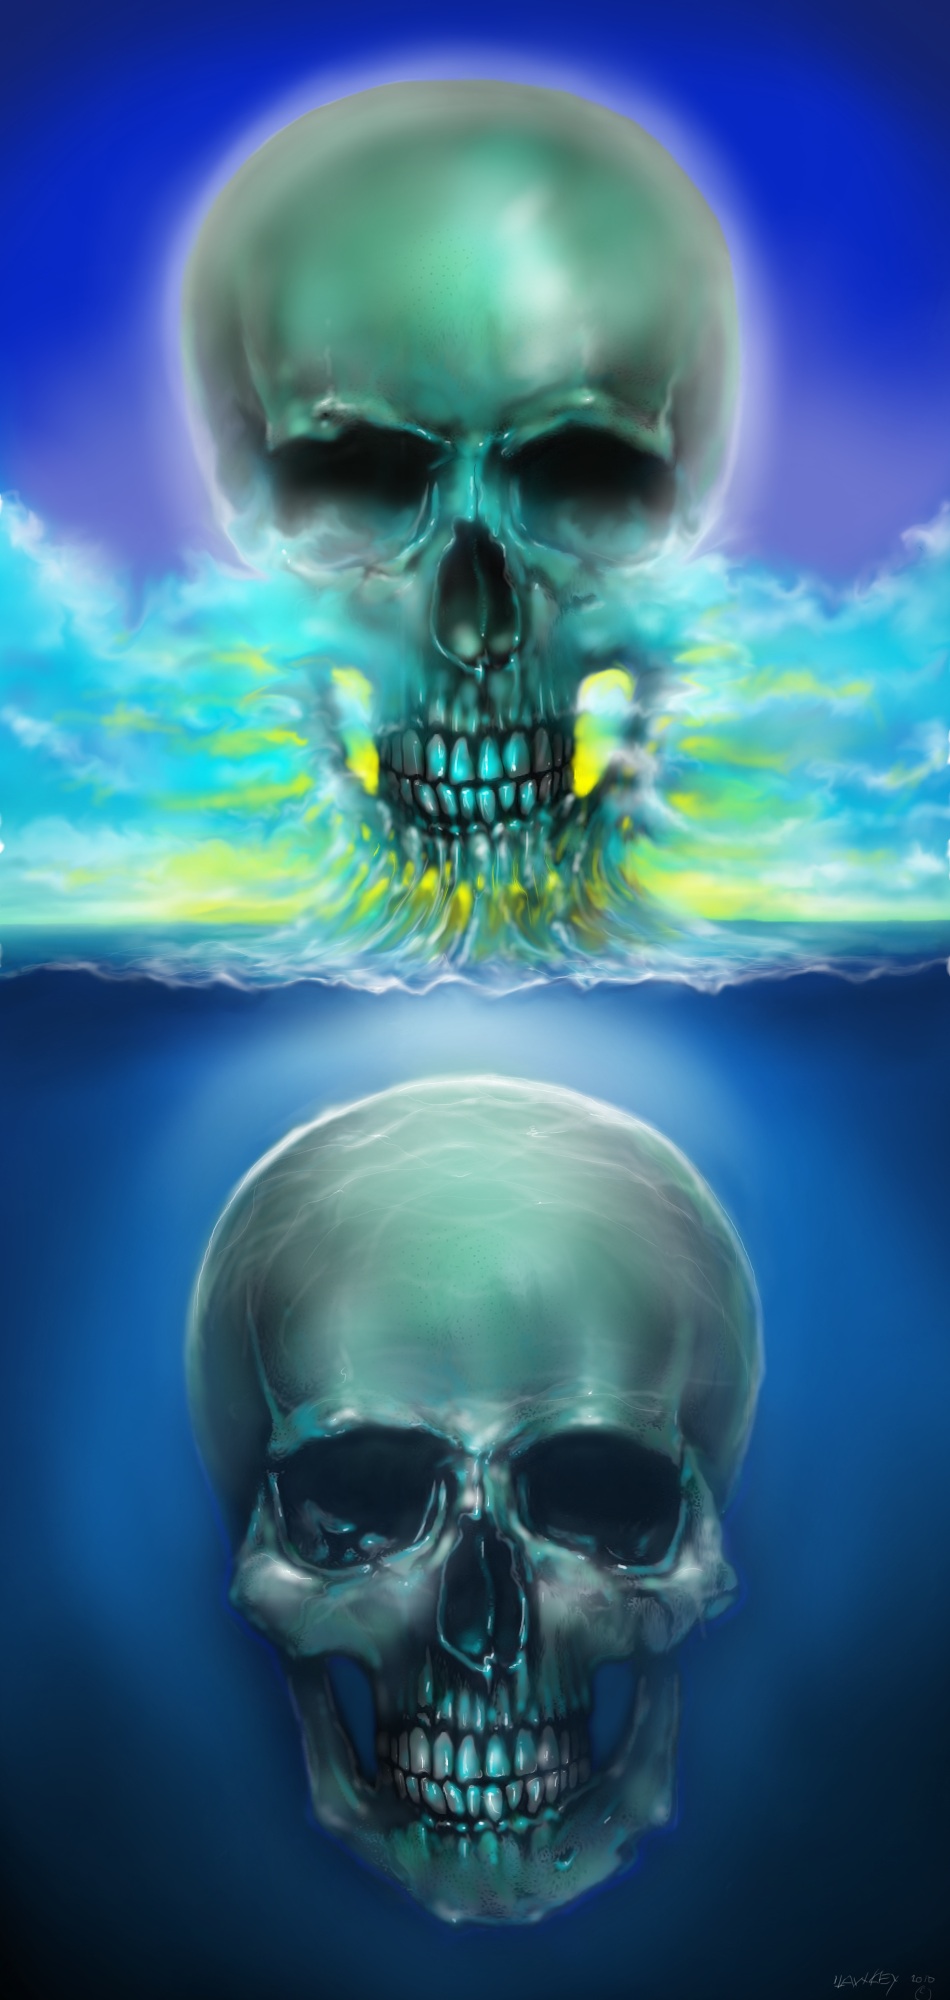 "above and below" by Eric Hawkey